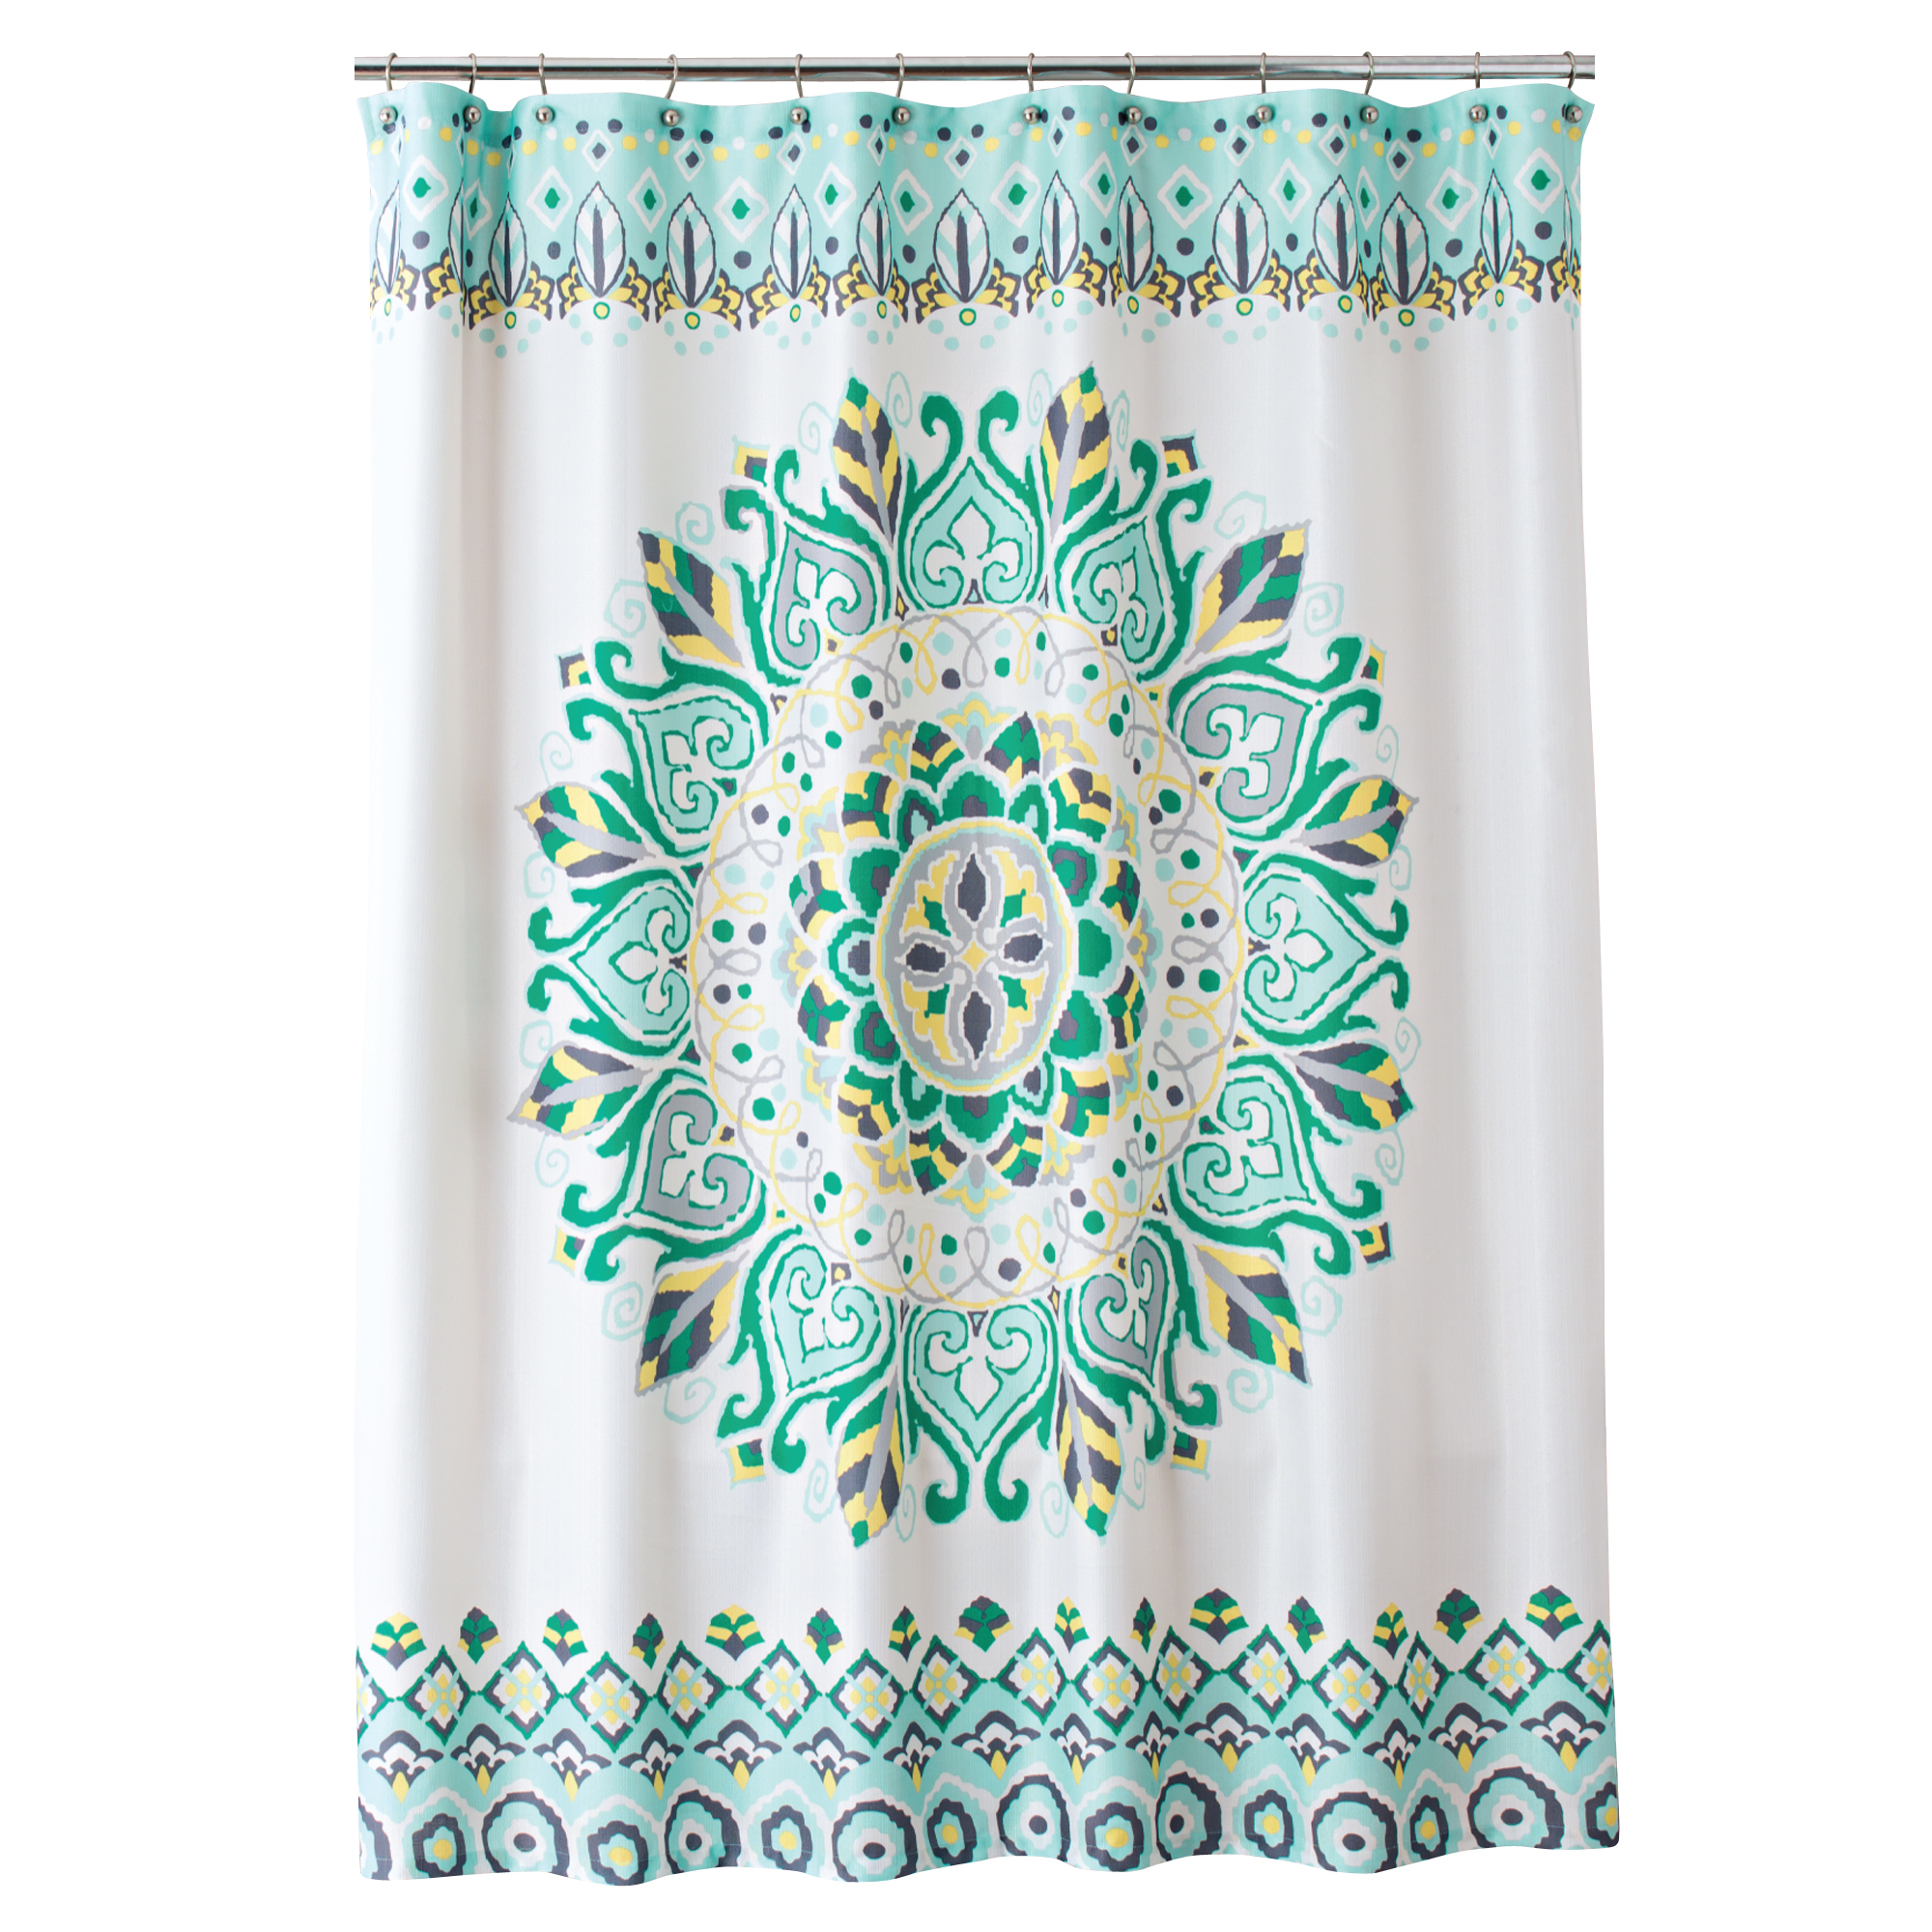 Multicolor Fabric Shower Curtain, 72" x 72", Better Homes & Gardens Medallion Pattern - image 2 of 5